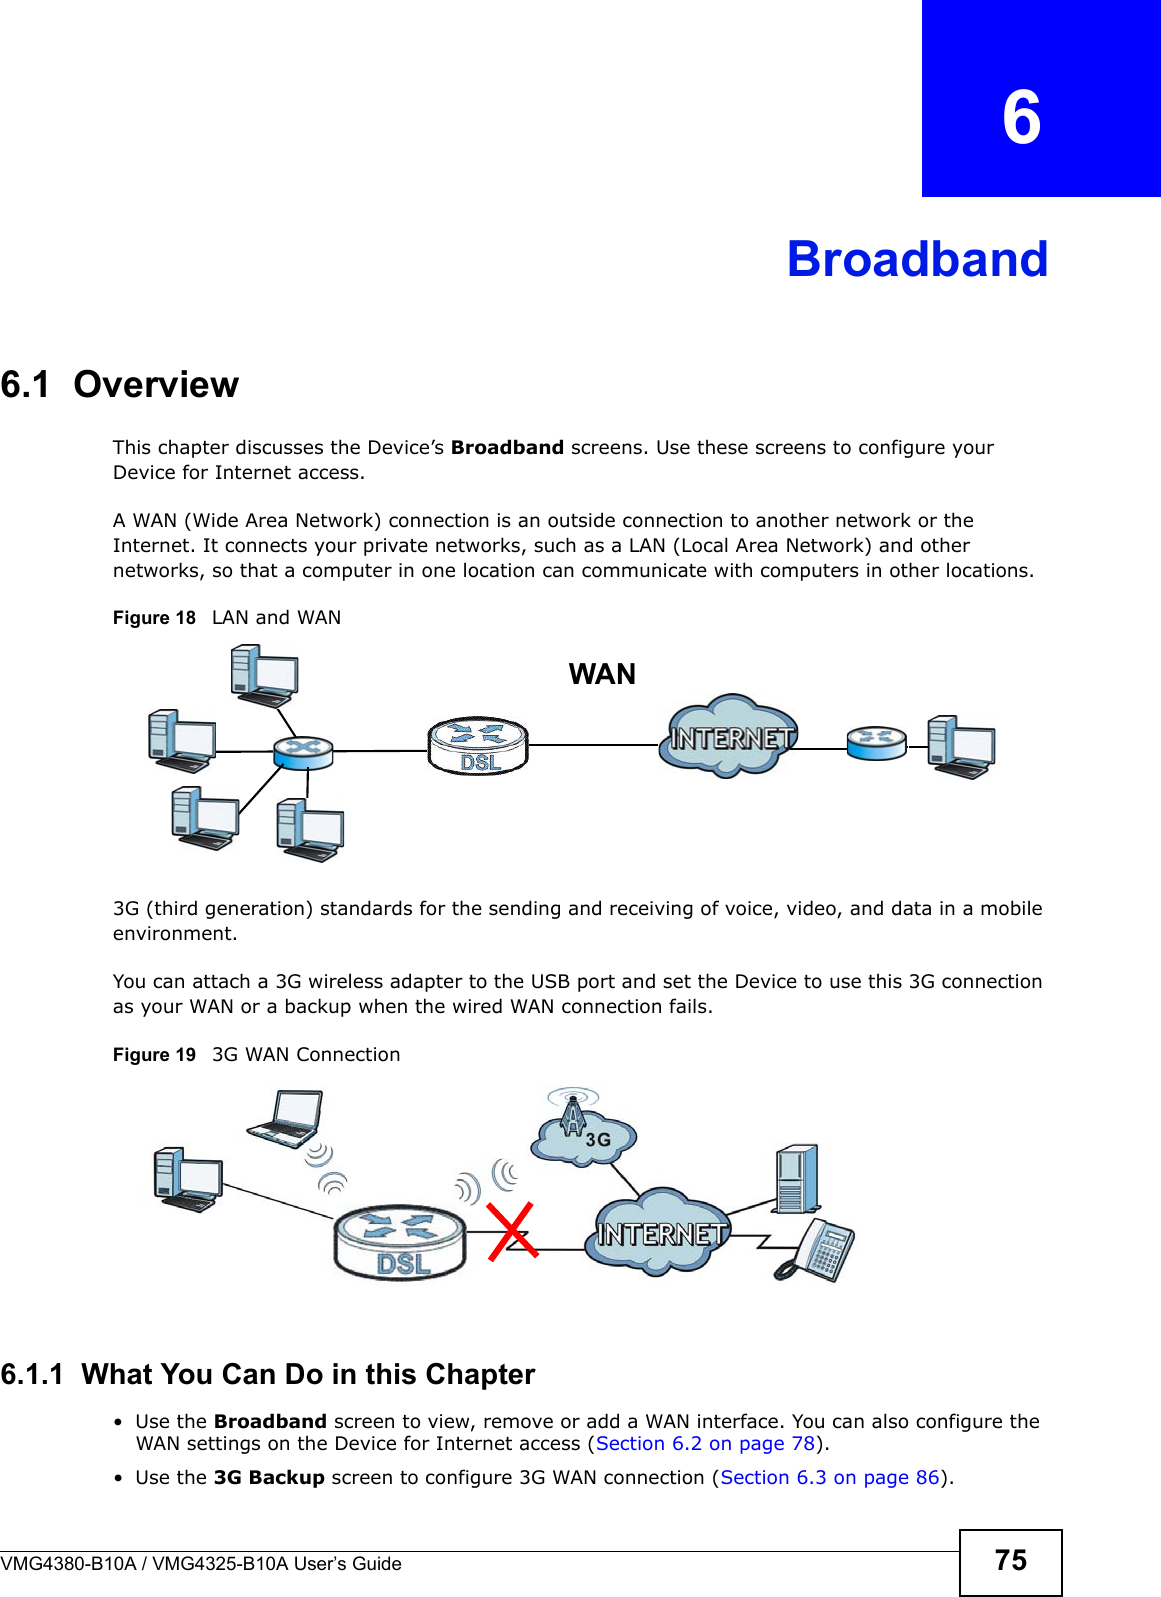 VMG4380-B10A / VMG4325-B10A User’s Guide 75CHAPTER  6Broadband6.1  OverviewThis chapter discusses the Device’s Broadband screens. Use these screens to configure yourDevice for Internet access.A WAN (Wide Area Network) connection is an outside connection to another network or the Internet. It connects your private networks, such as a LAN (Local Area Network) and other networks, so that a computer in one location can communicate with computers in other locations.Figure 18 LAN and WAN3G (third generation) standards for the sending and receiving of voice, video, and data in a mobile environment. You can attach a 3G wireless adapter to the USB port and set the Device to use this 3G connection as your WAN or a backup when the wired WAN connection fails.Figure 19   3G WAN Connection 6.1.1  What You Can Do in this Chapter• Use the Broadband screen to view, remove or add a WAN interface. You can also configure theWAN settings on the Device for Internet access (Section 6.2 on page 78).• Use the 3G Backup screen to configure 3G WAN connection (Section 6.3 on page 86). WAN